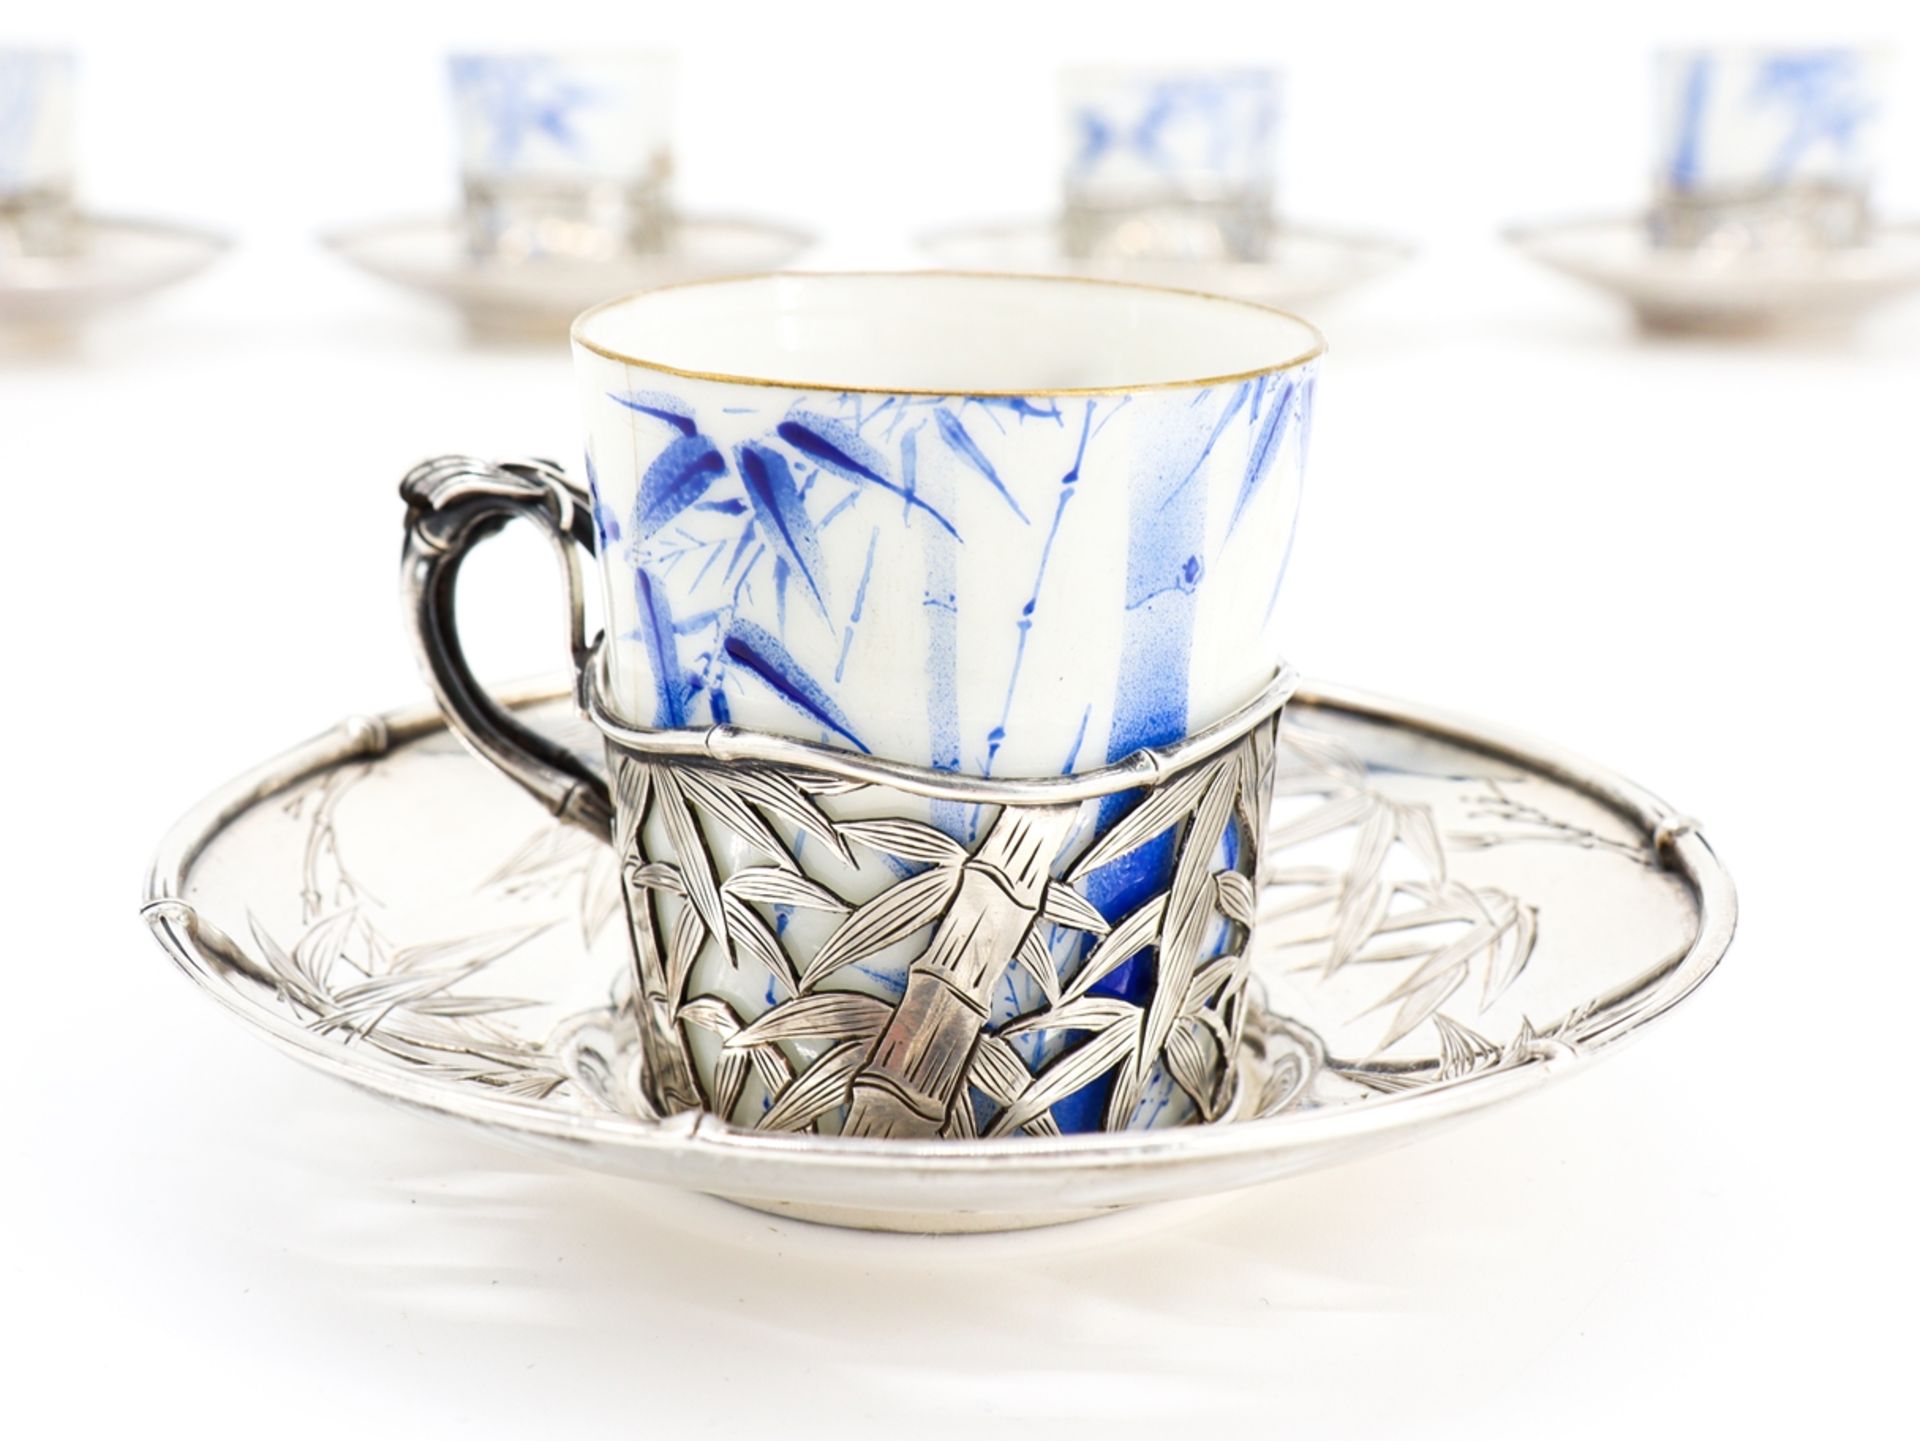 5 Cups, Chinese Export Silver, Porcelain, Crane Motif, China, c. 1900